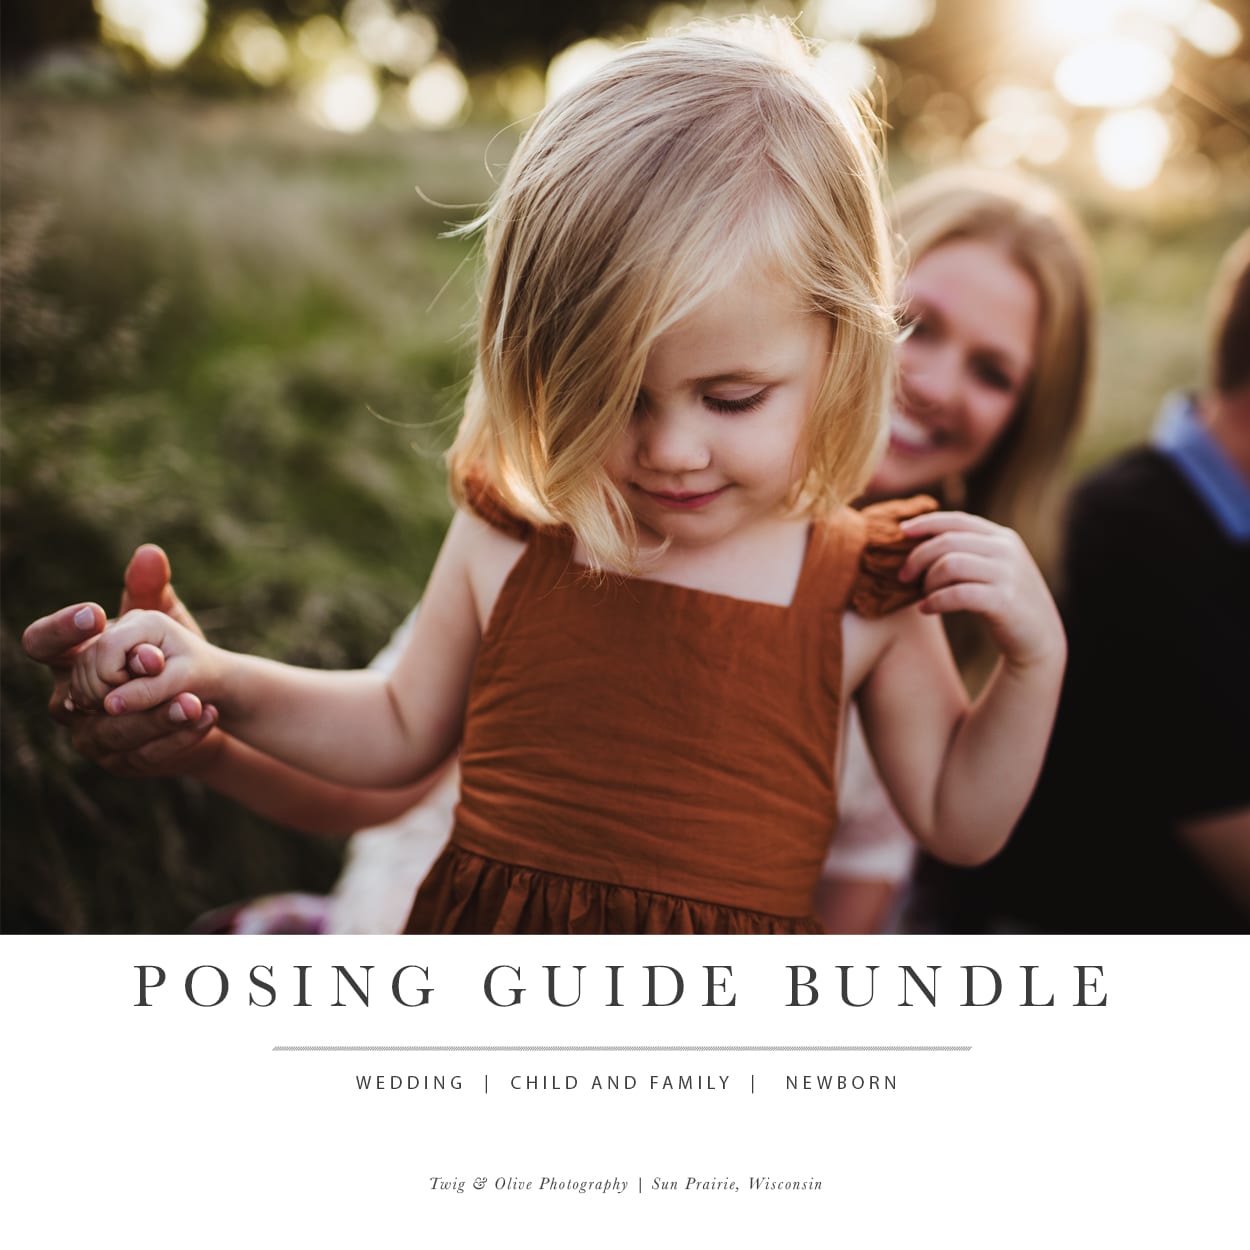 women style guide for posing, lighting and brand identity. | Photography  poses women, Fashion photography poses, Girl photography poses